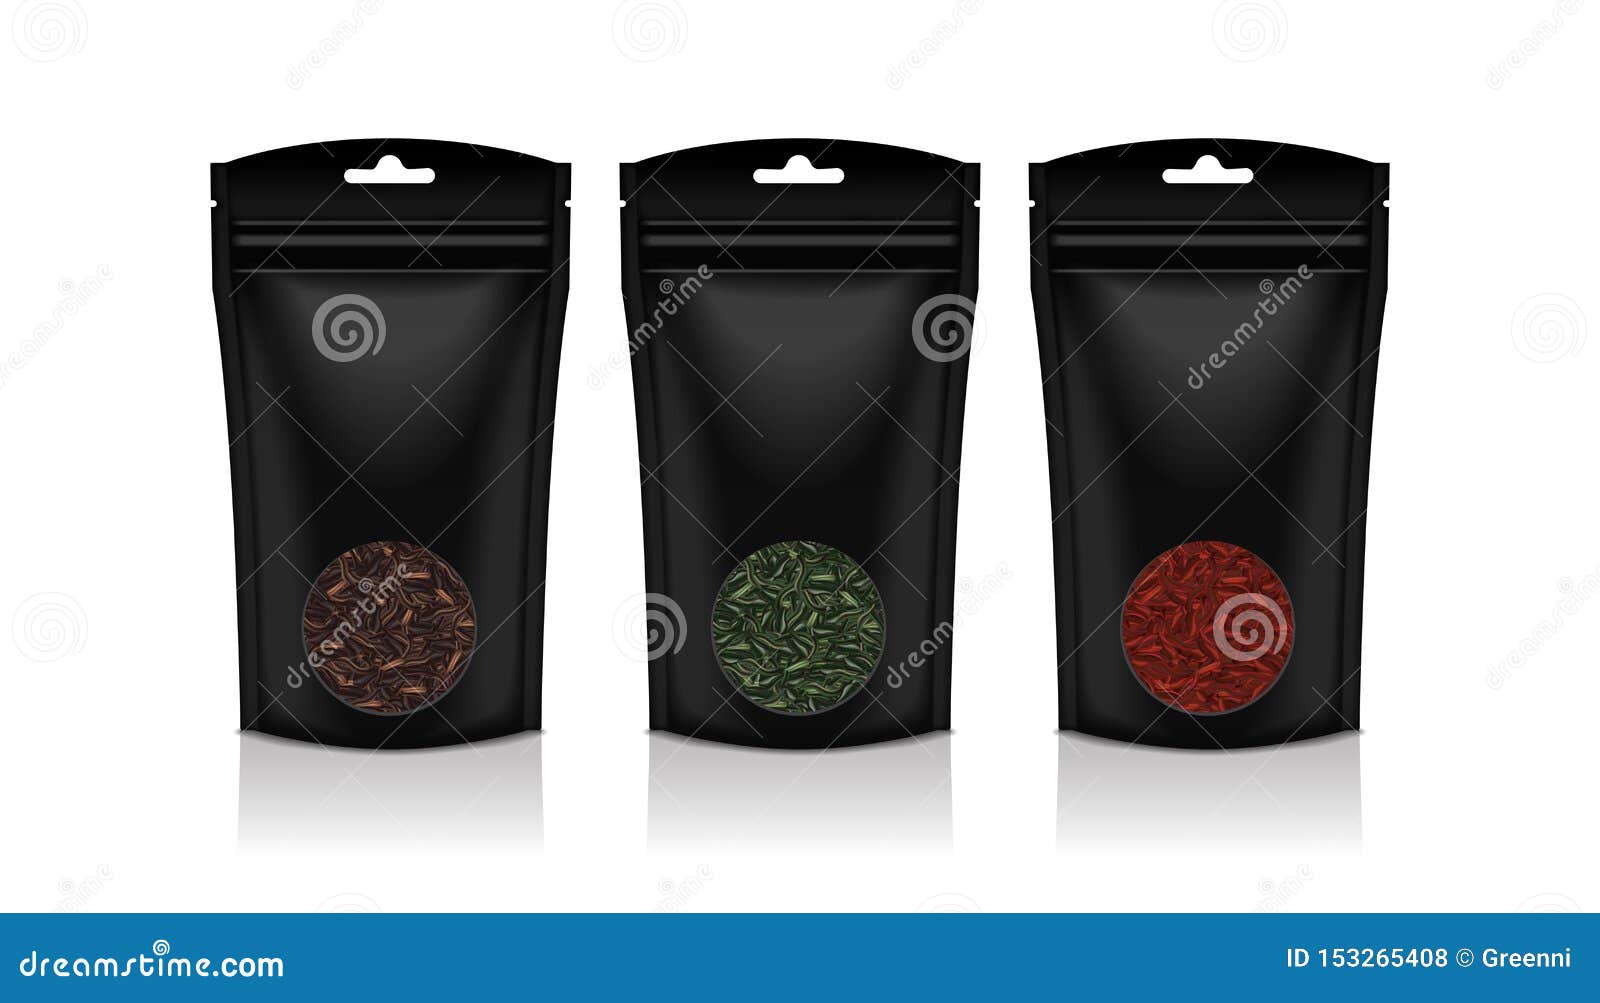 Download Black Plastic Bags With Round Windows. Black, Green, Red ...